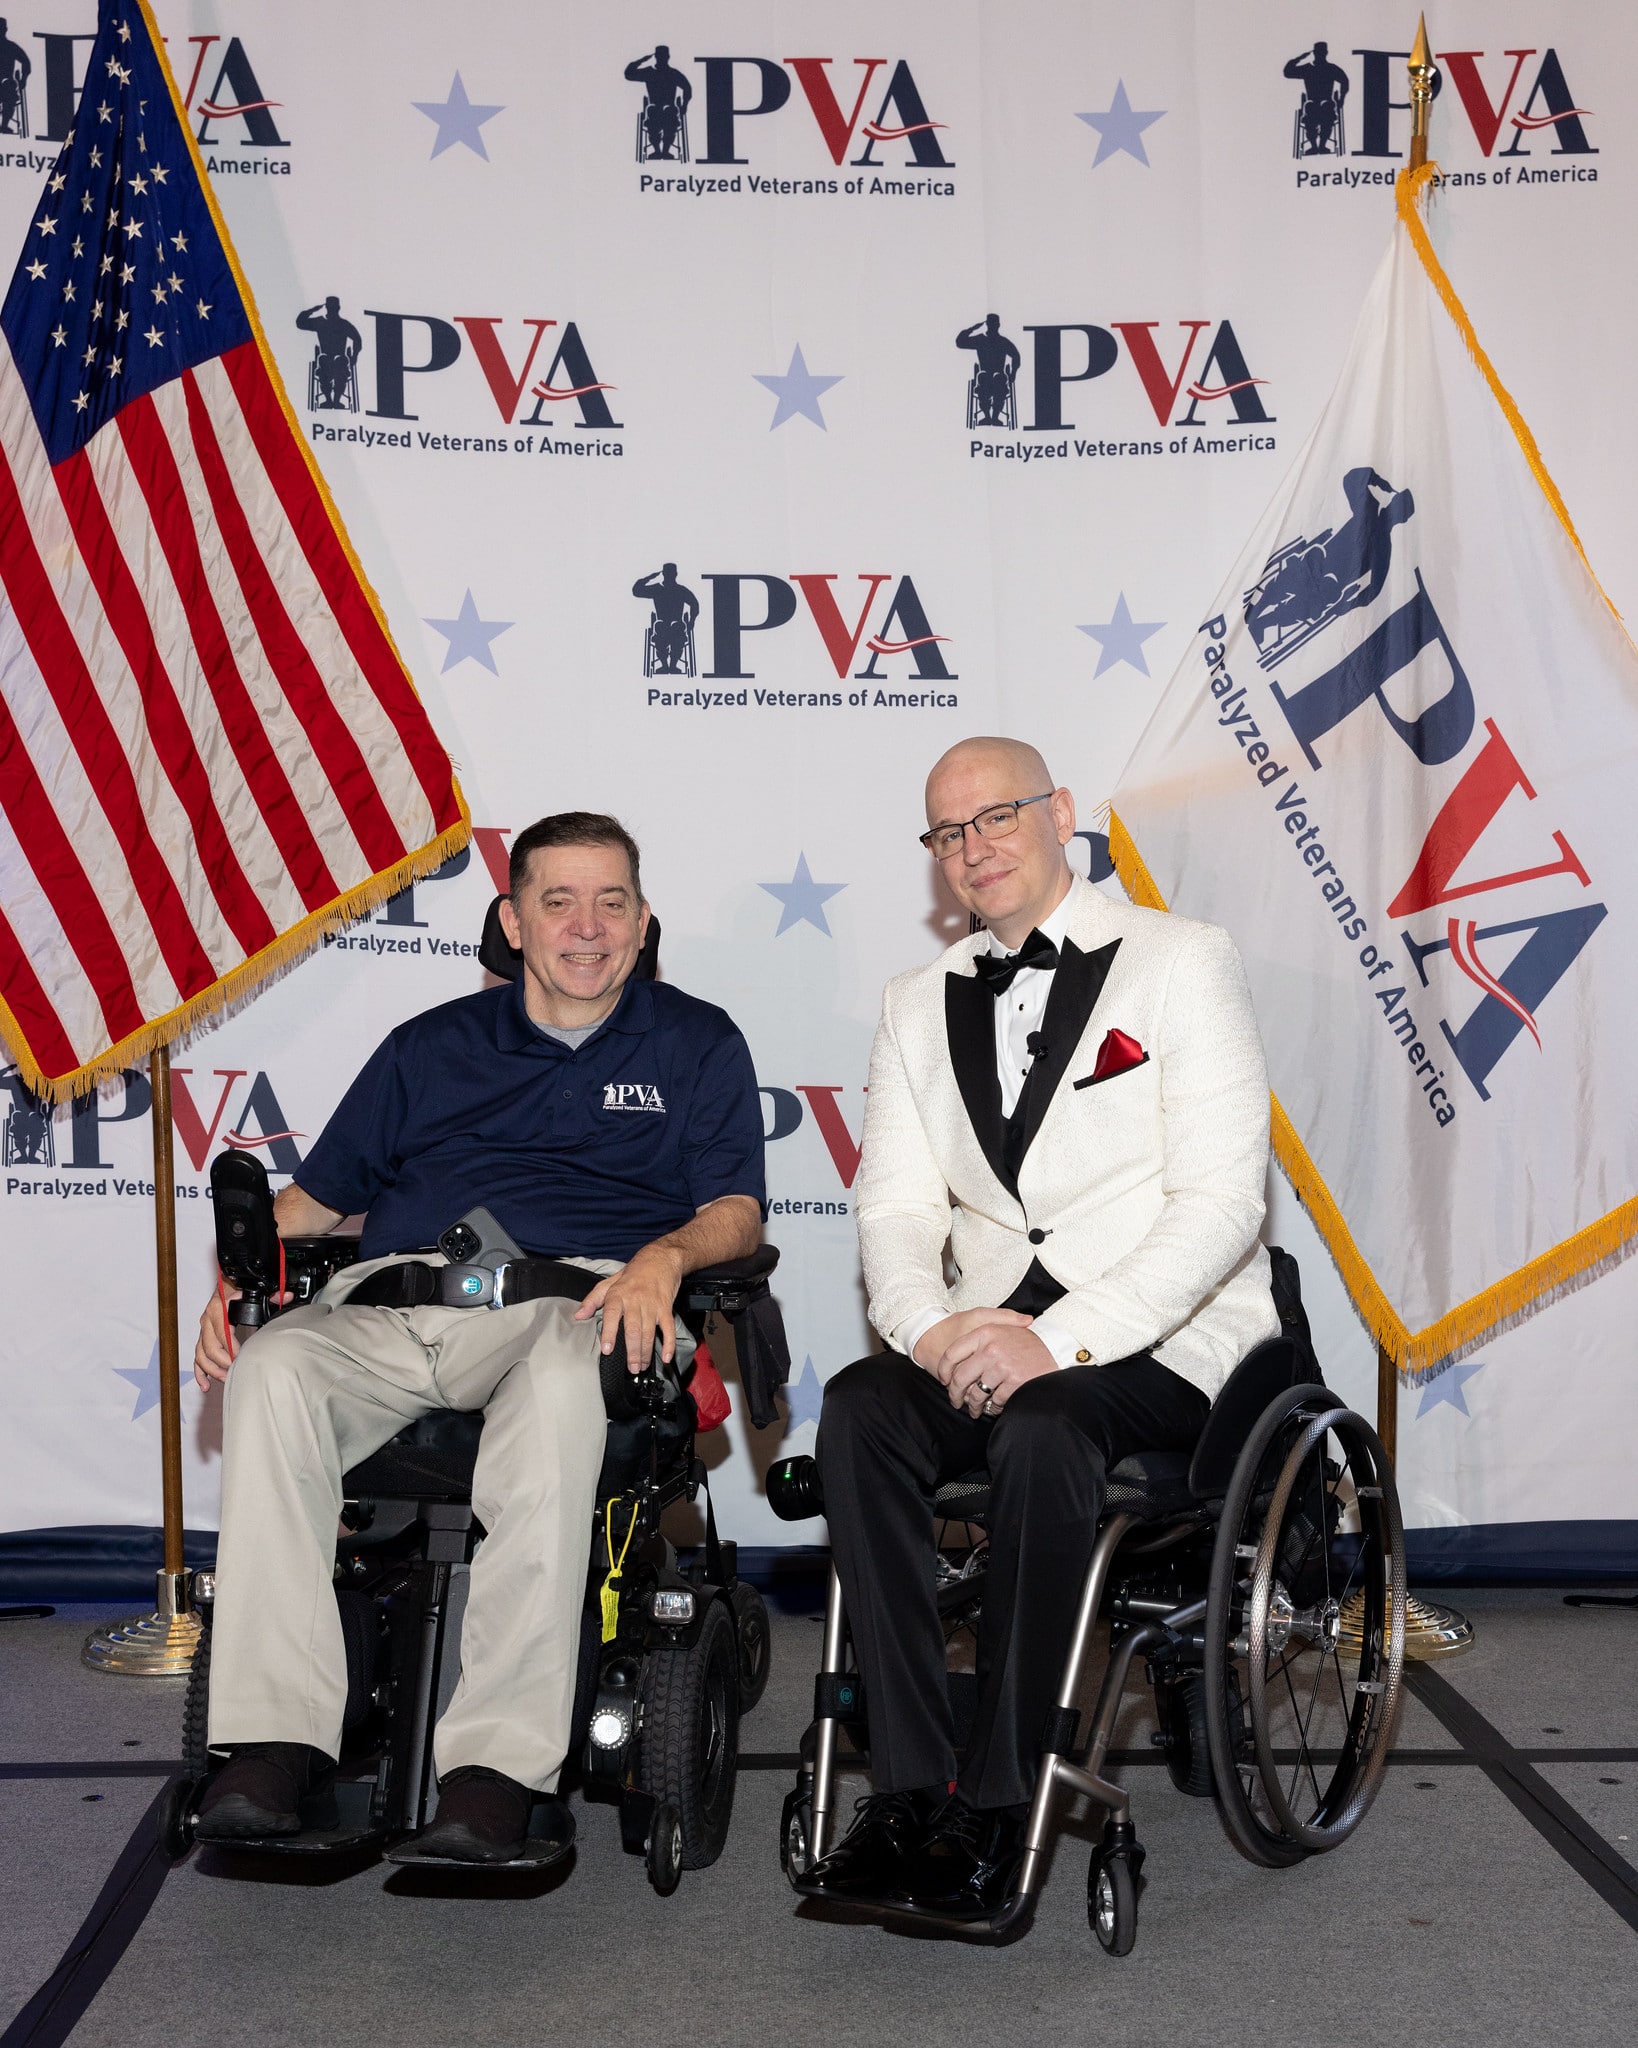 Immediate Past President Charles Brown and Chief Operating Officer Shaun Castle pose in a power wheelchair and manual chair with PVA in the background and an American flag and flag with a PVA logo on either side of them